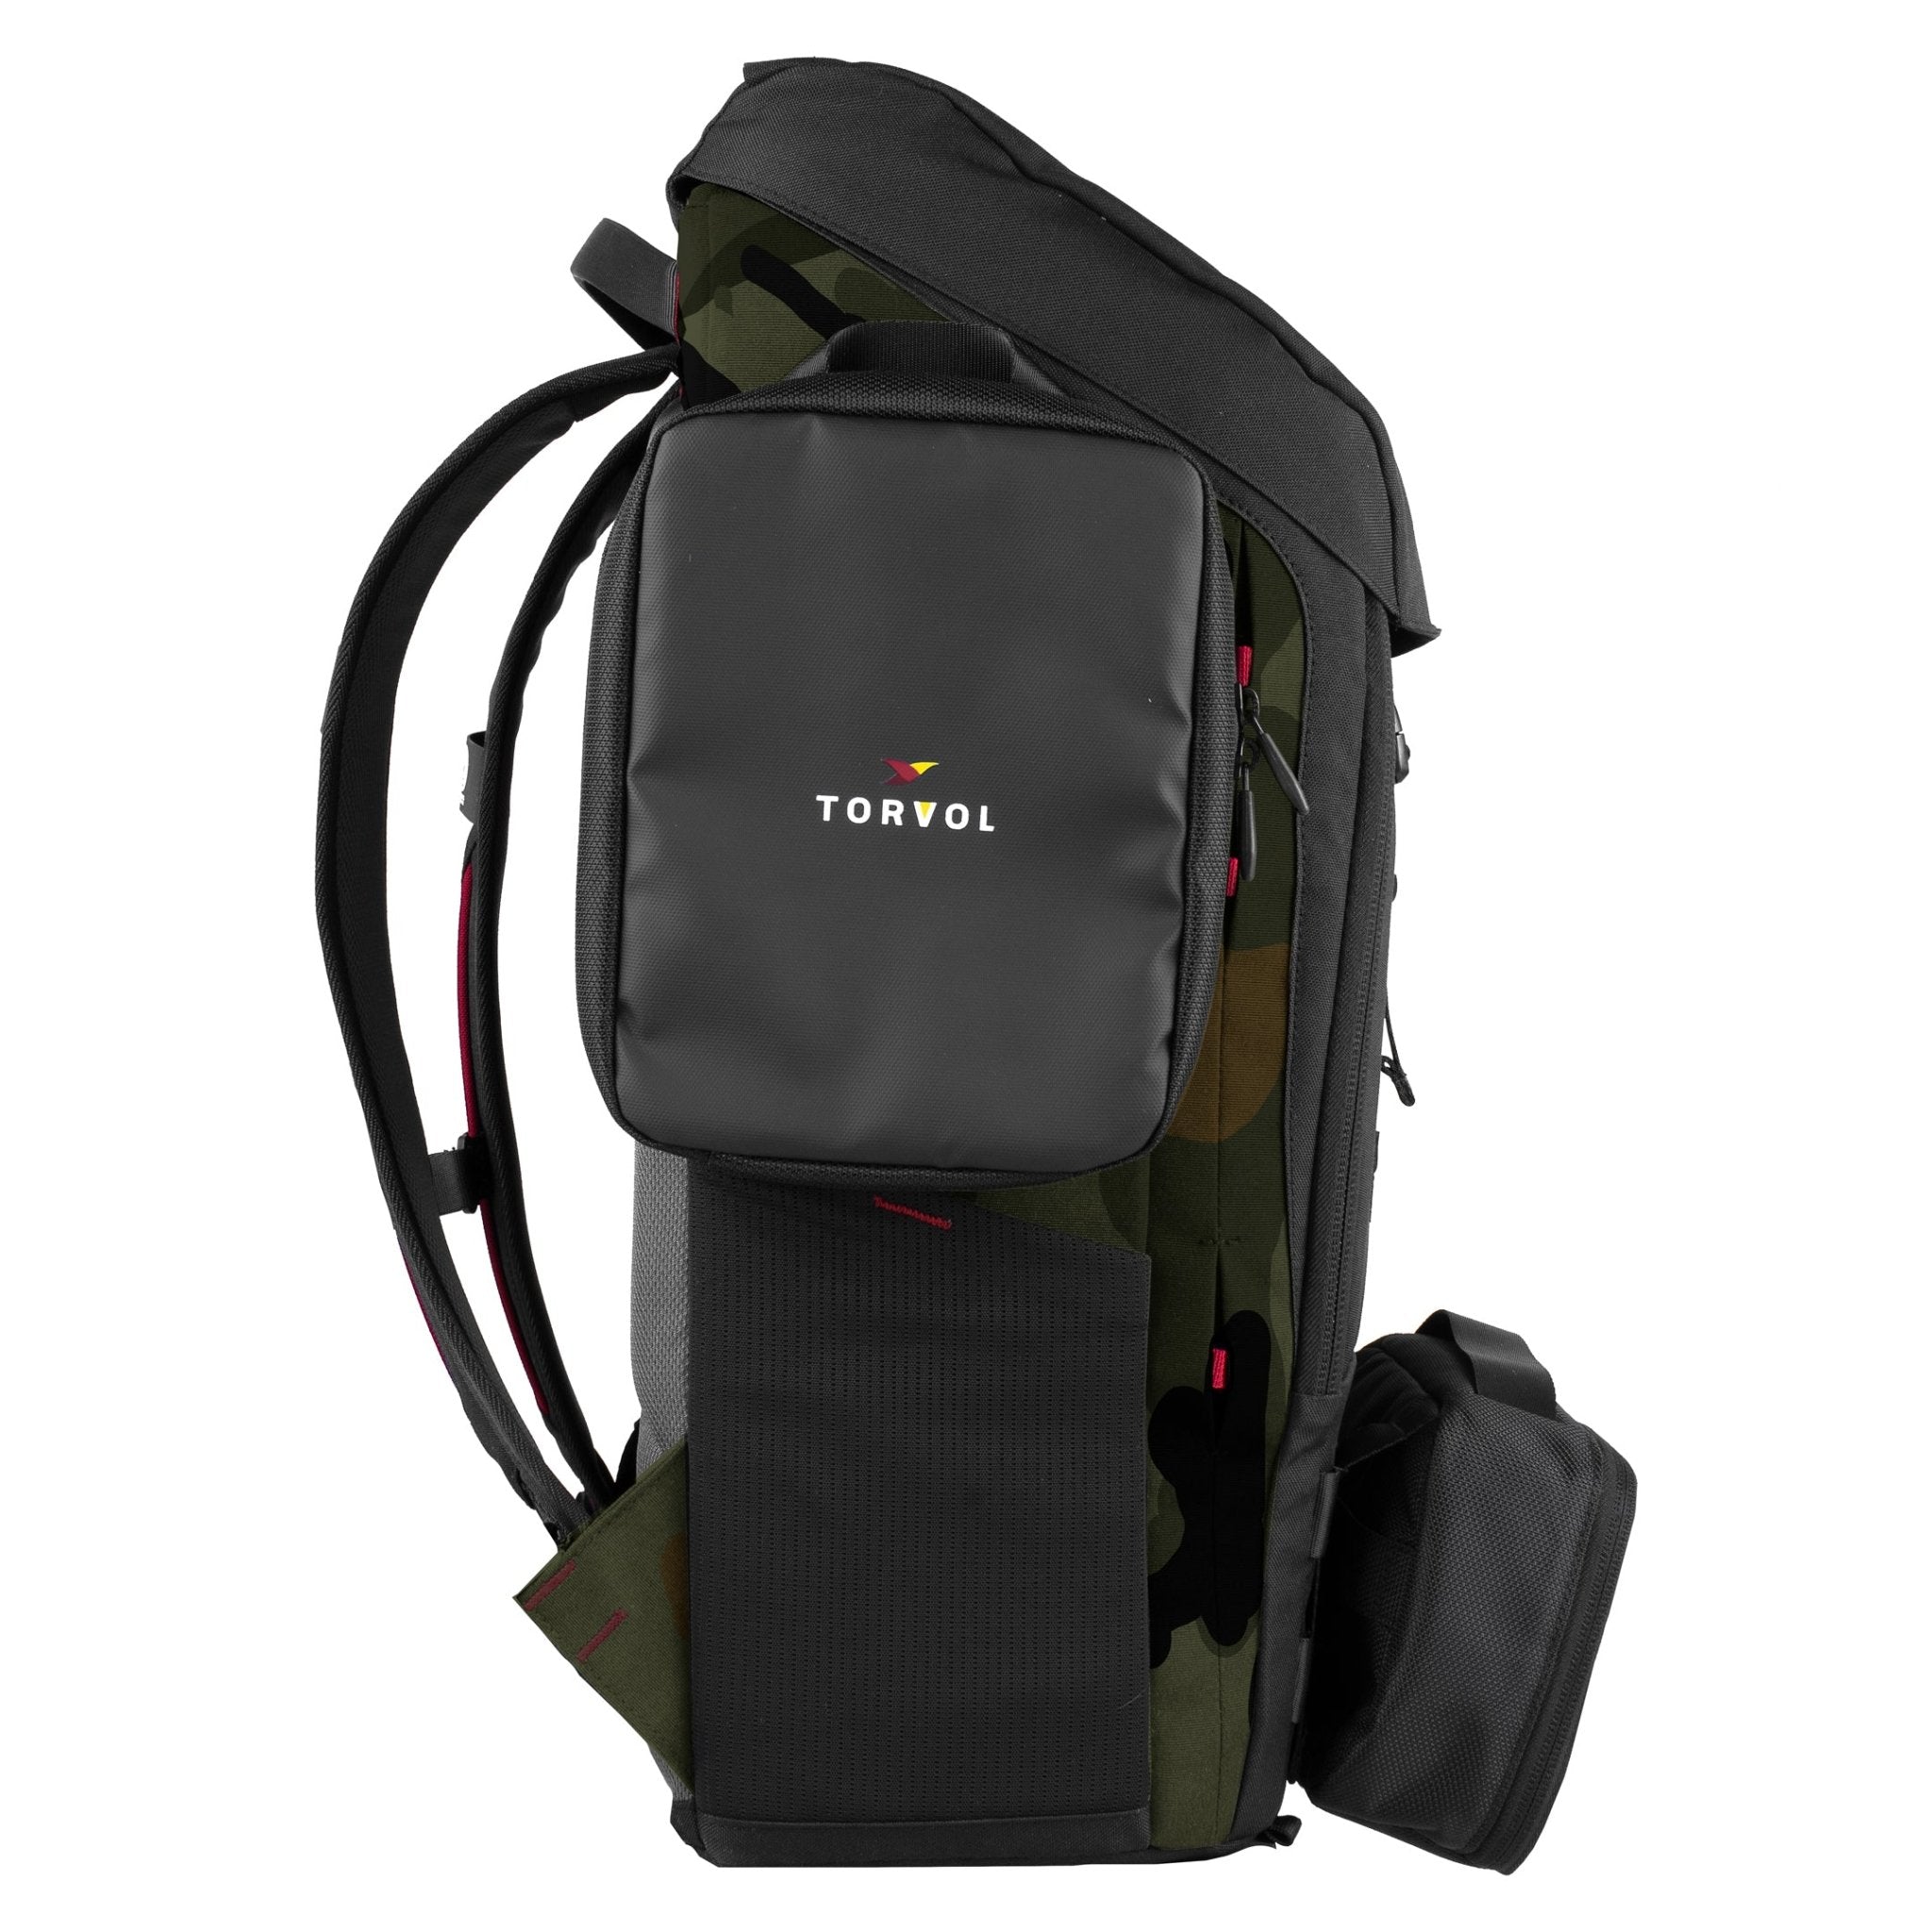 Torvol Urban Carrier Backpack - Your All-Round Freestyle Backpack 20 - Torvol - Drone Authority